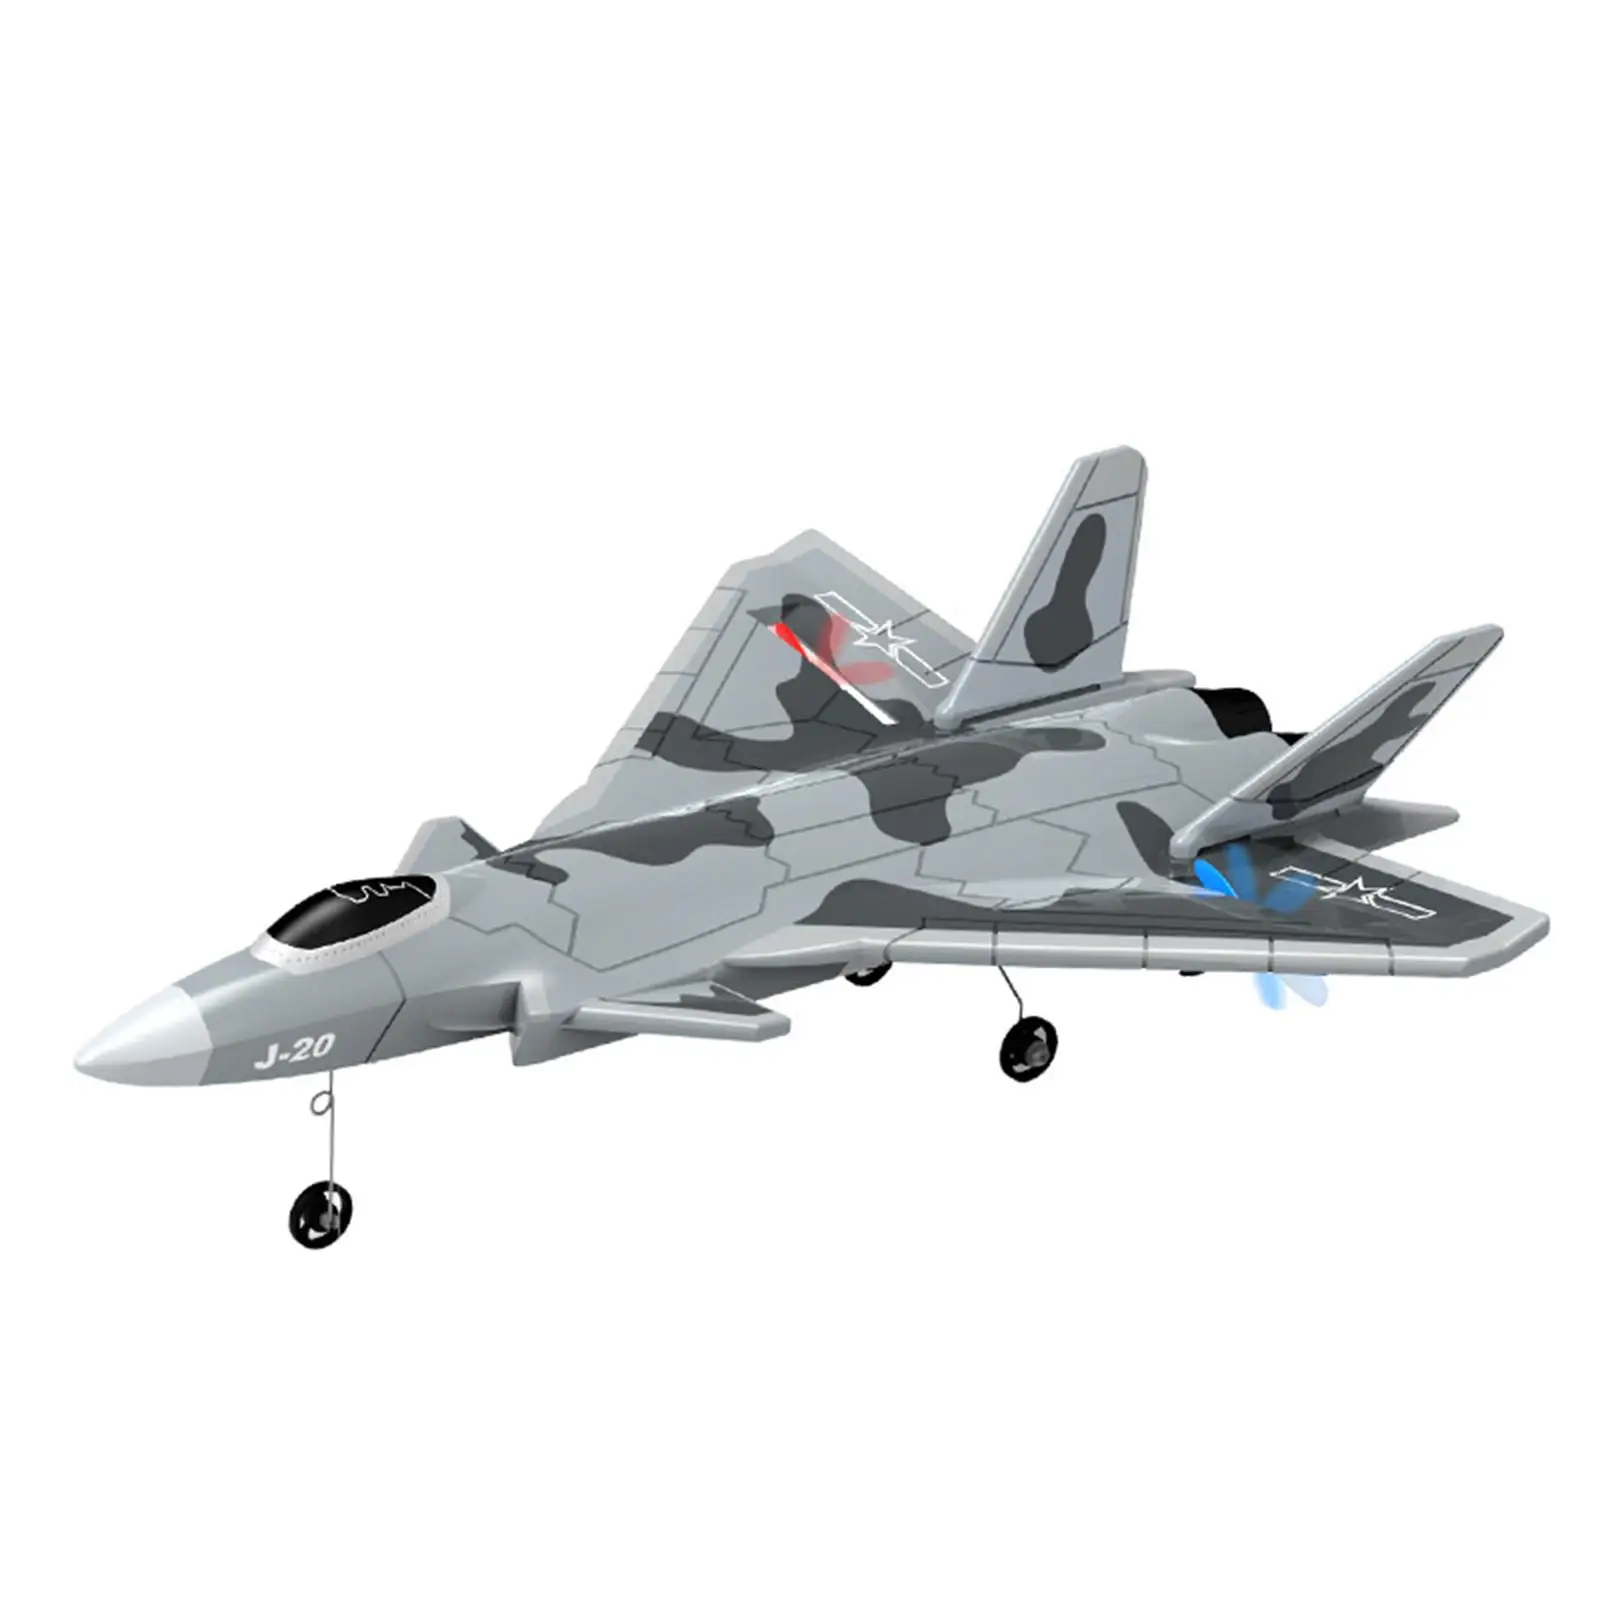 1:72 Scale RC Plane Ground Glide and Manual Take Off 2 Channel Simulation with Display Stand Jet Fighter RC Glider Ready to Fly